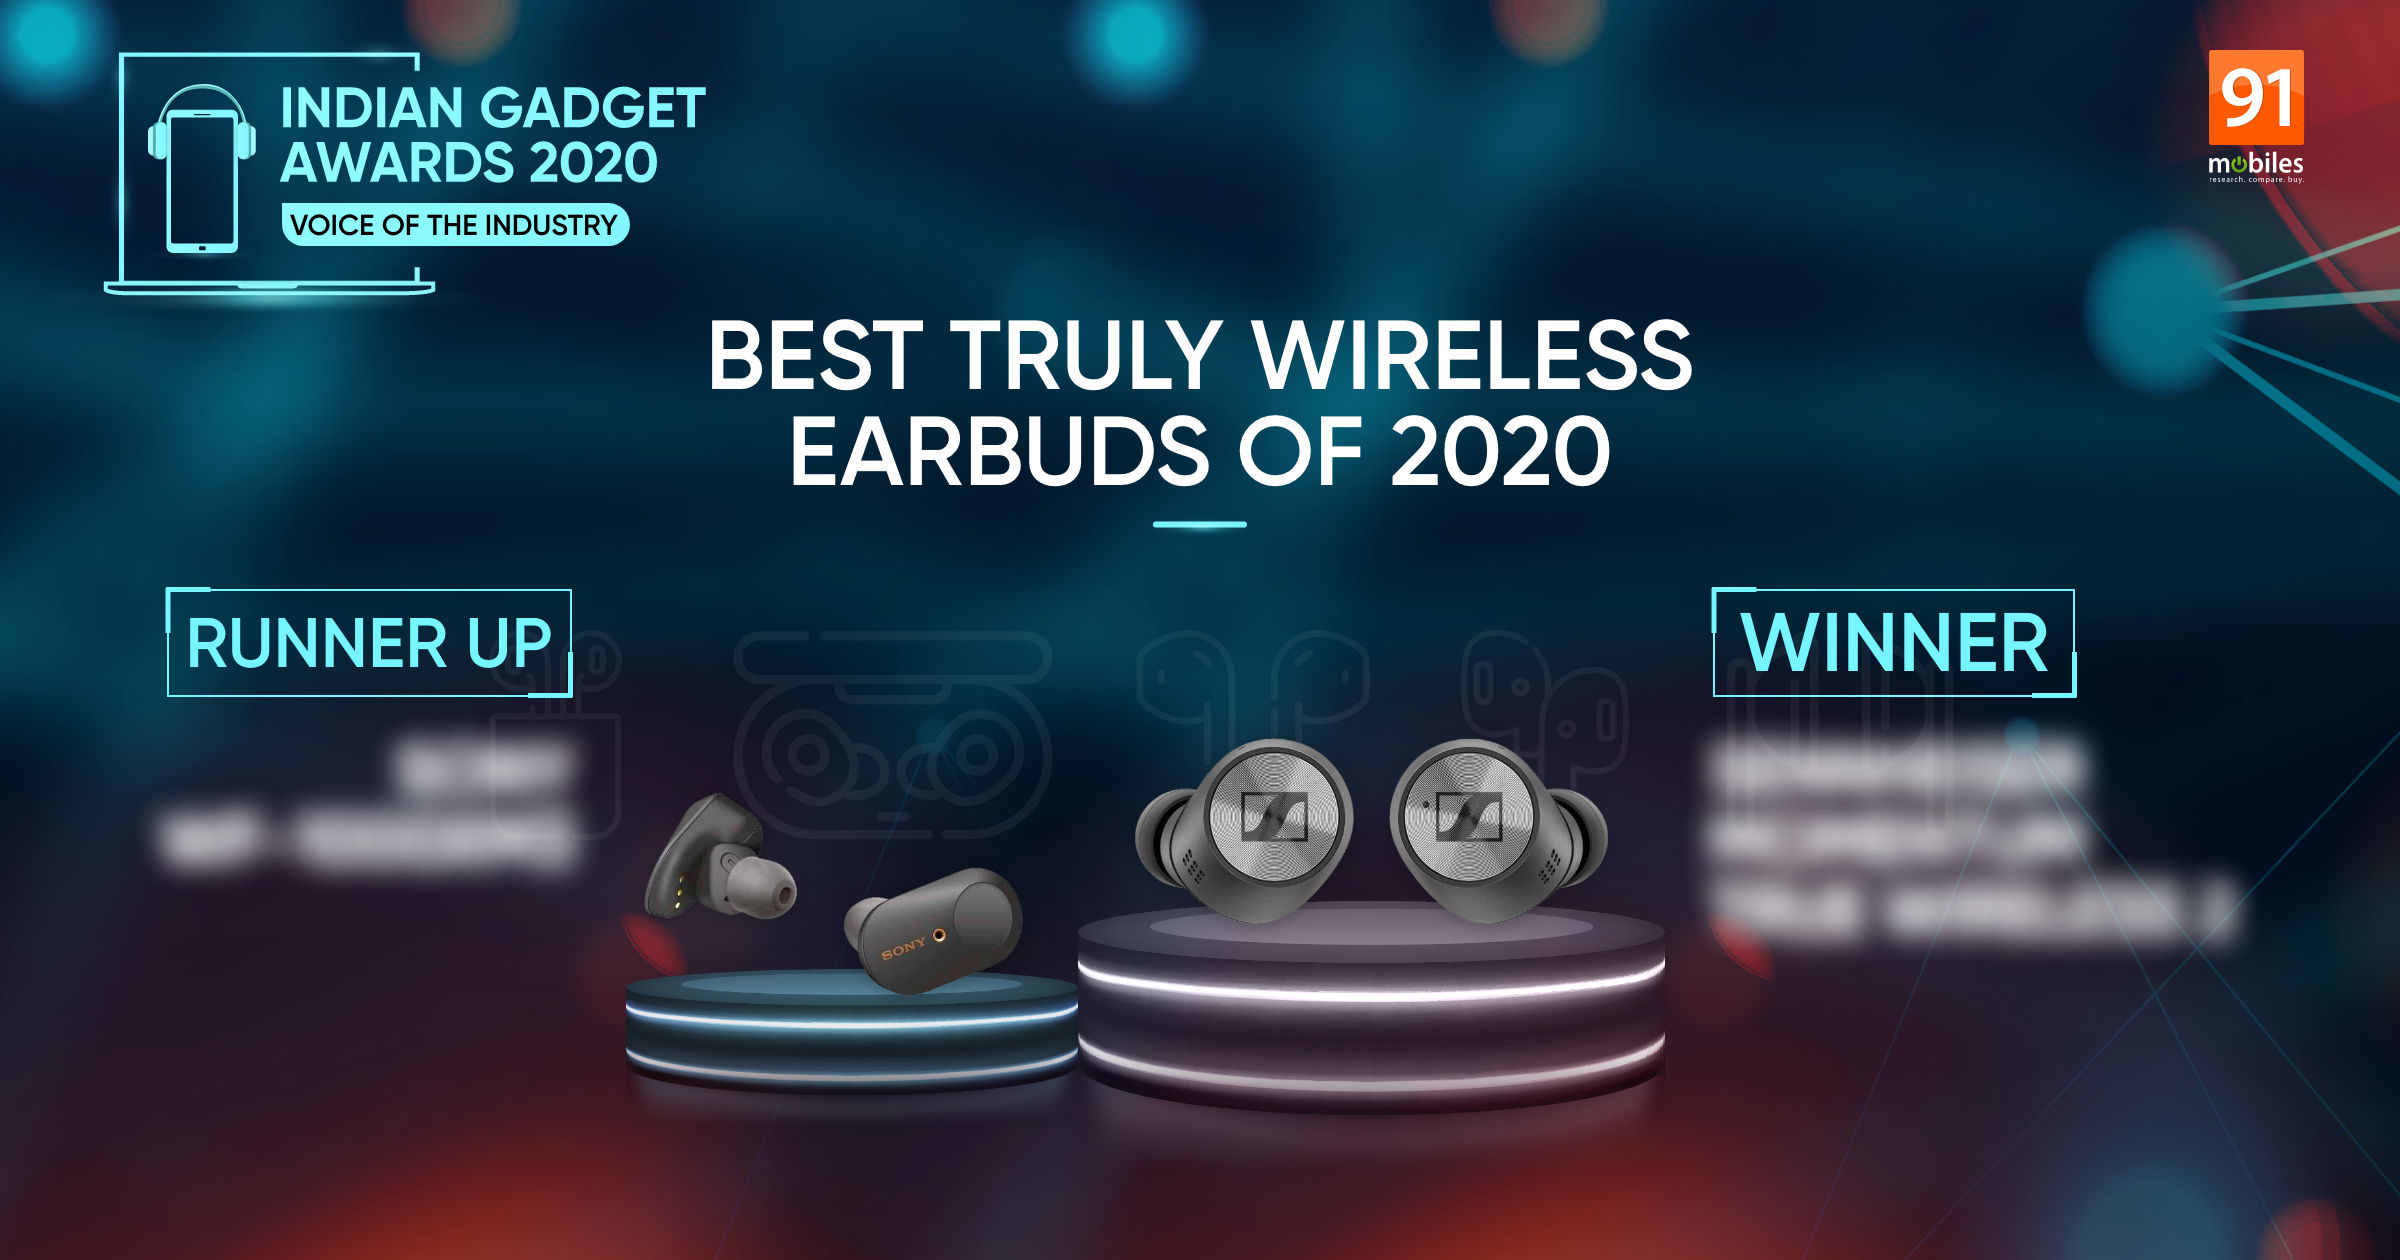 Indian Gadget Awards — Best Truly Wireless Earbuds of 2020: Sennheiser and Sony fight for the title